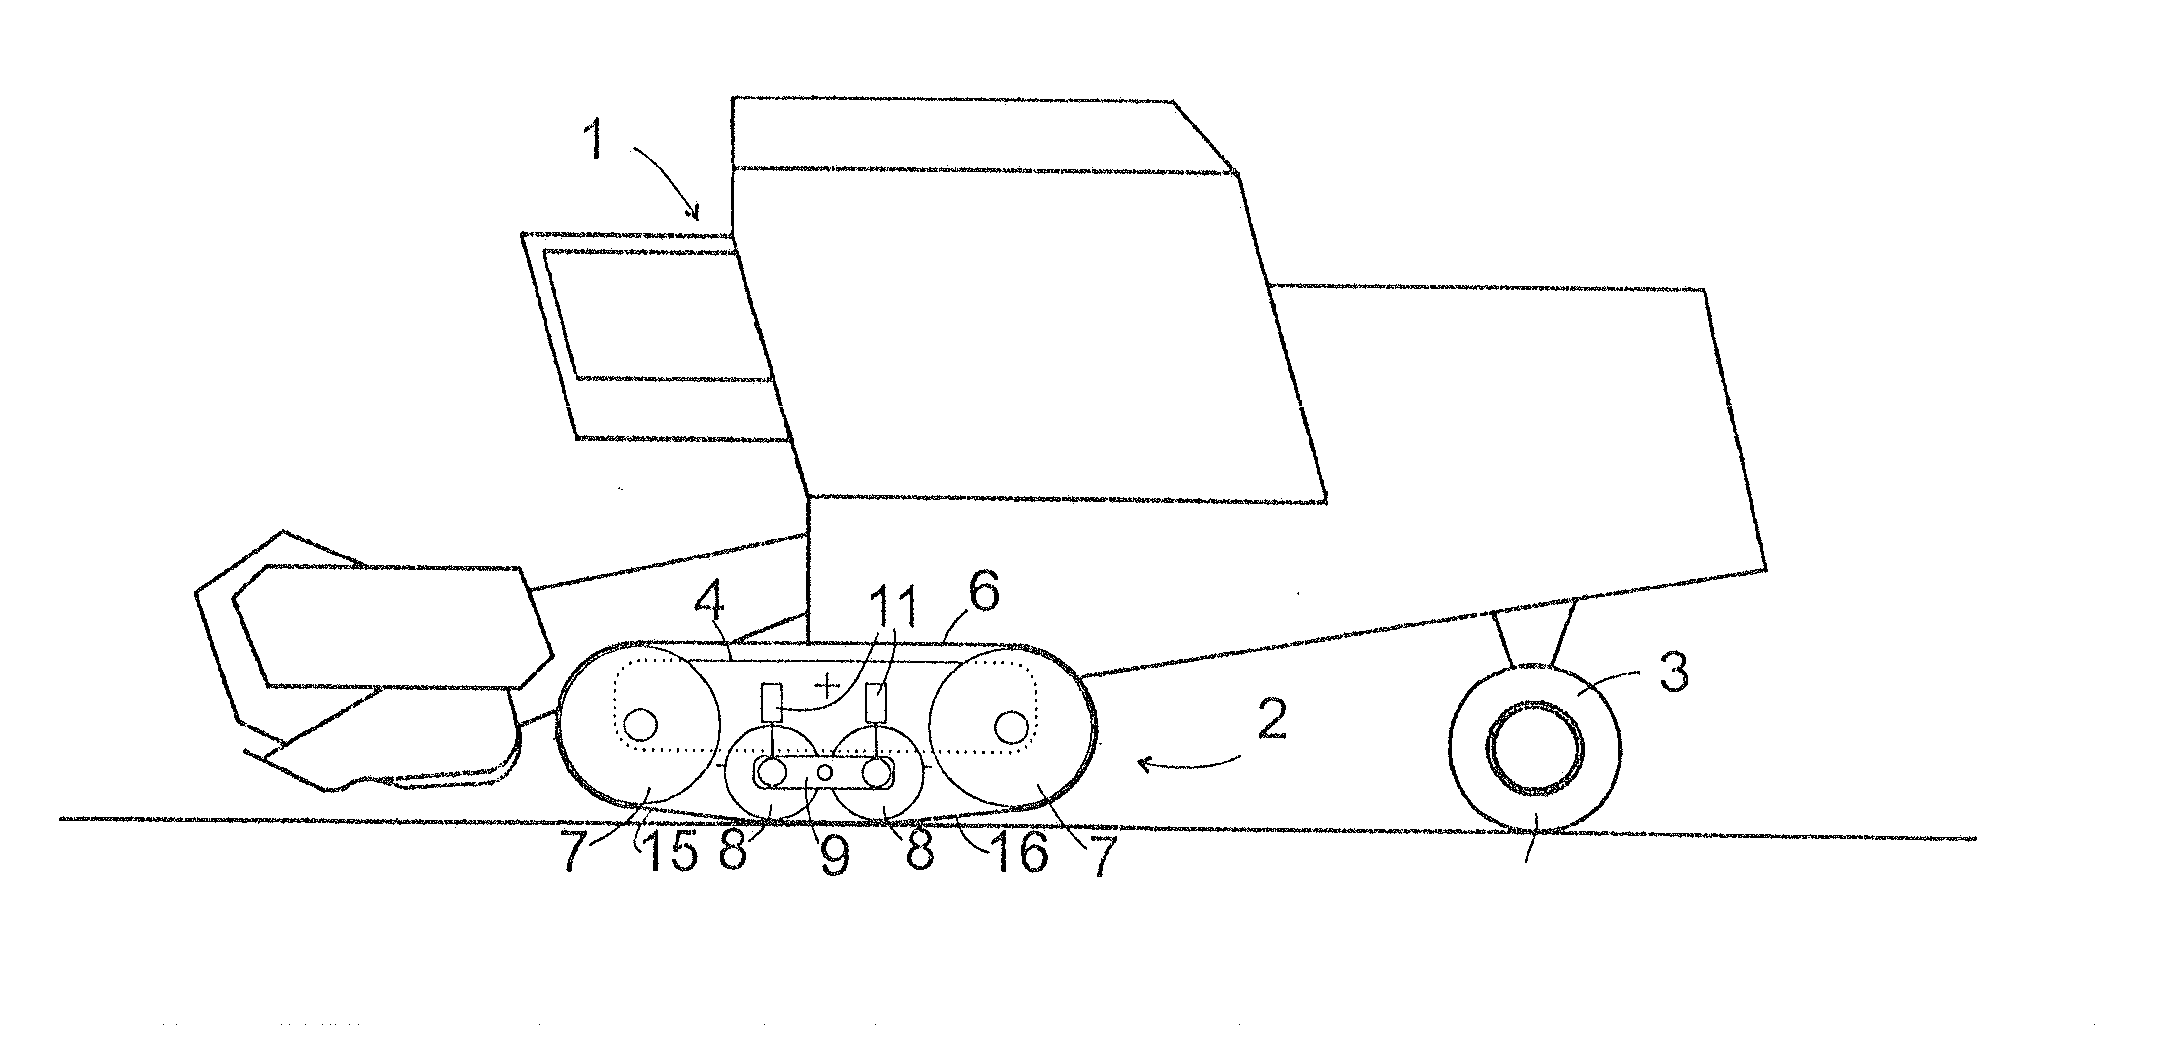 Vehicle comprising a crawler track assembly